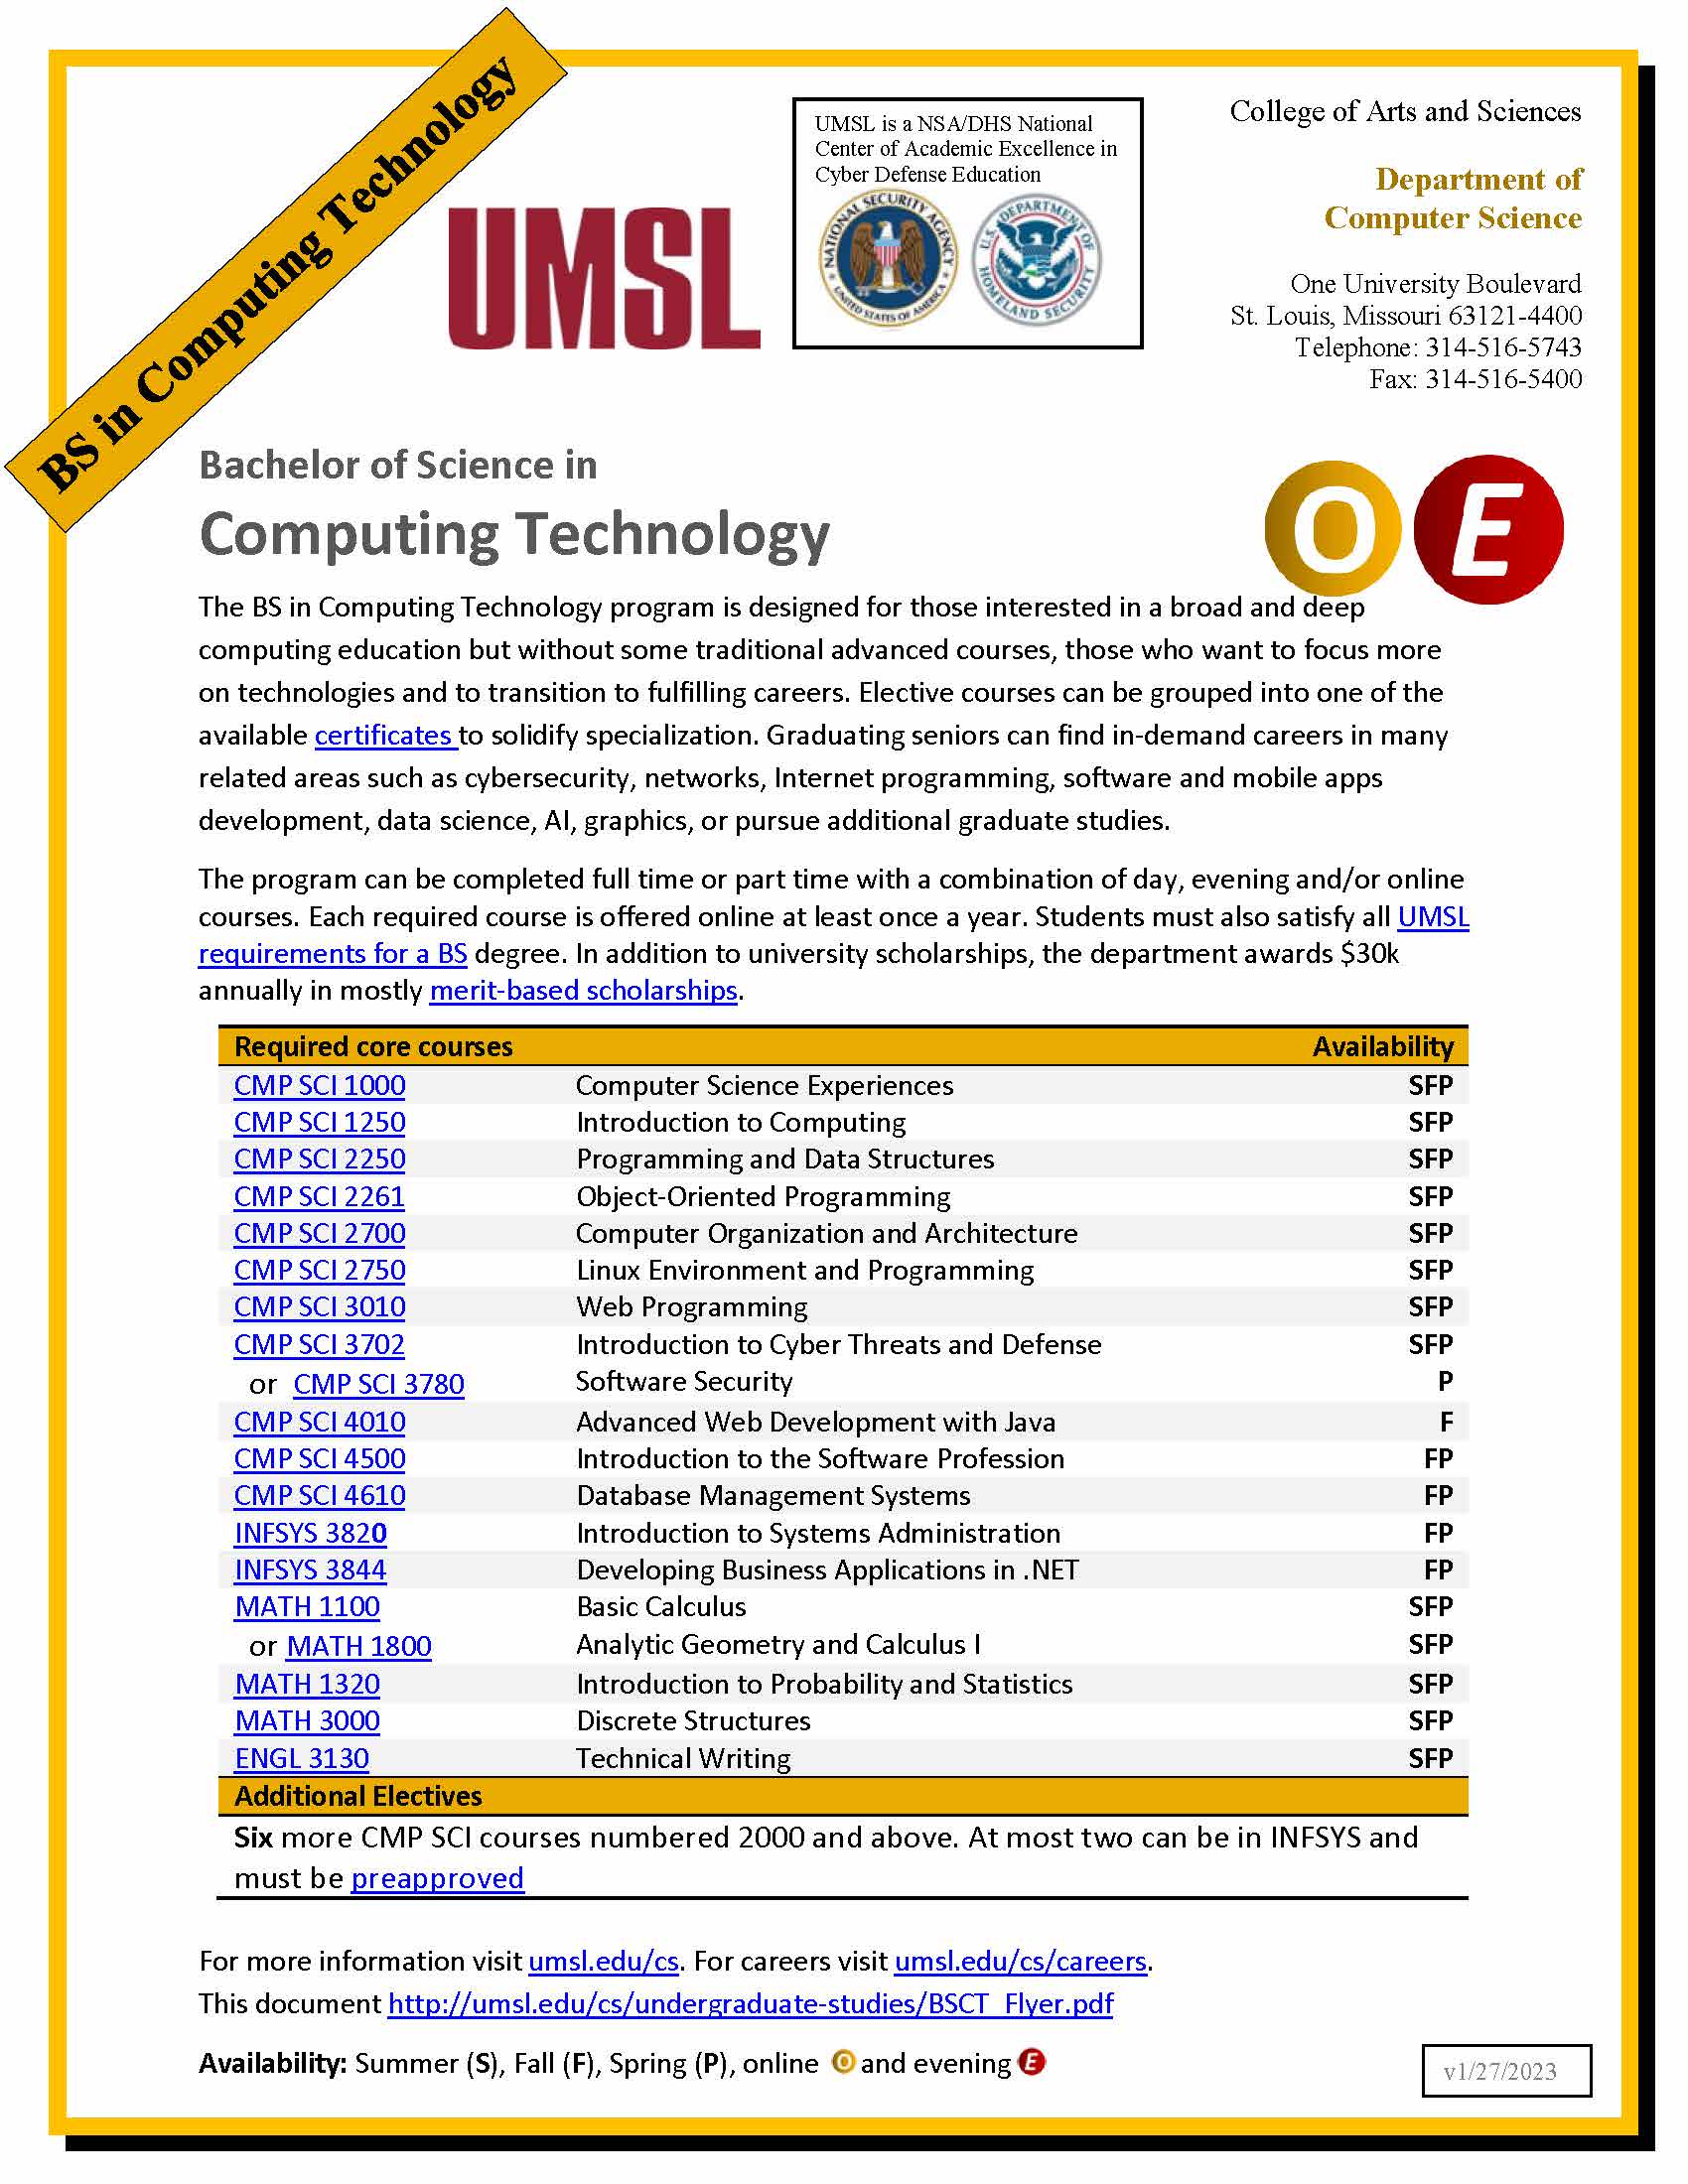 BS in Computing Technology